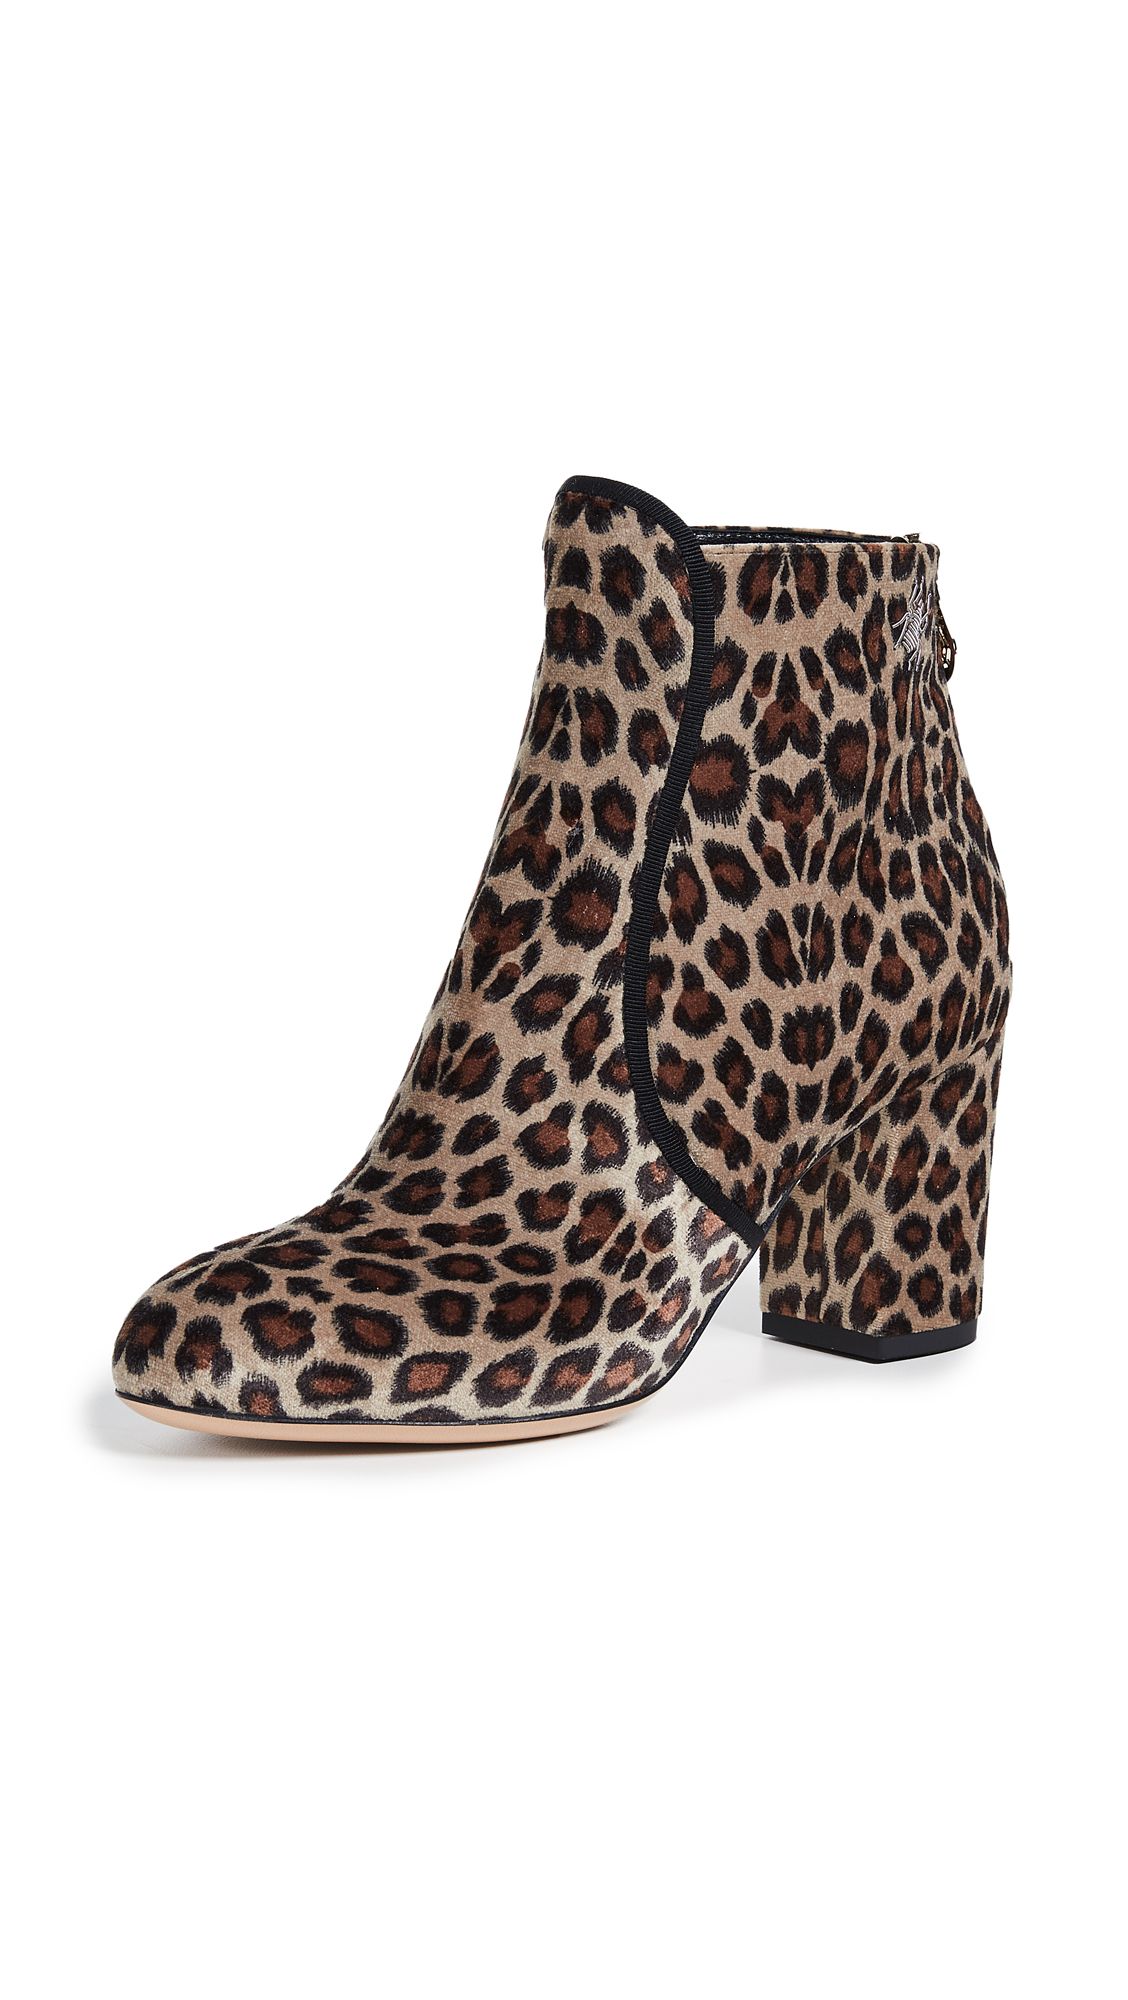 Charlotte Olympia Leopard Booties | Shopbop